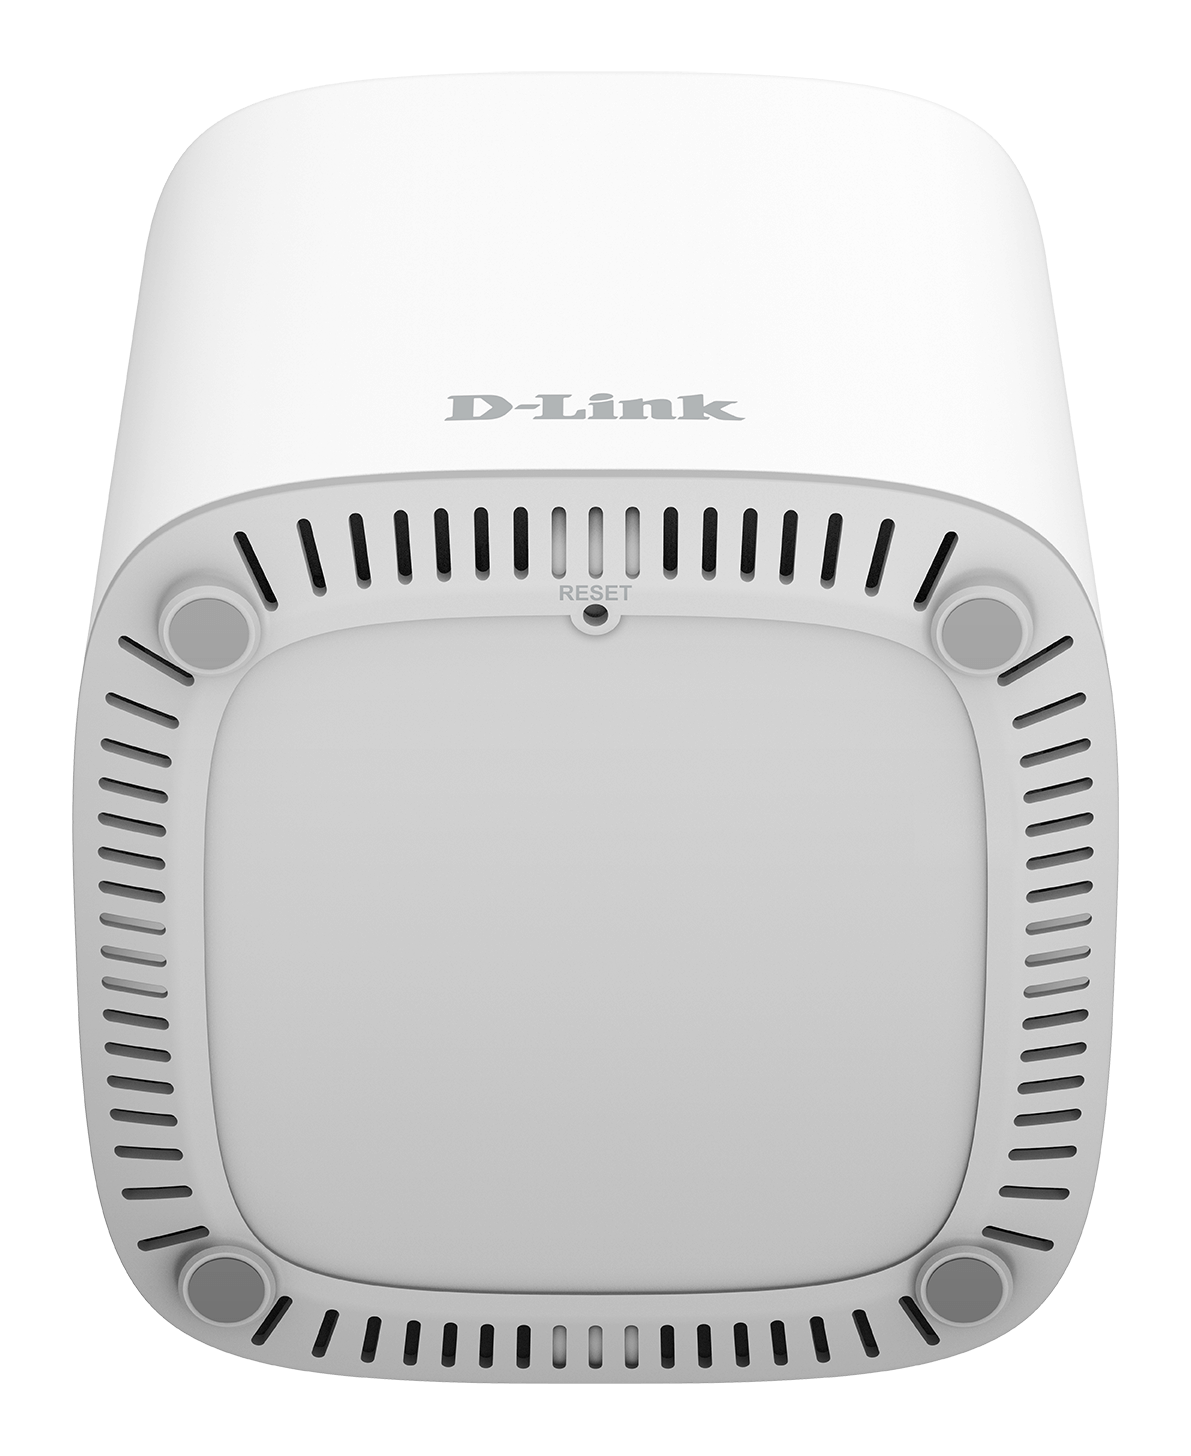 D-Link Covr Whole Home Mesh Wi-Fi: Wi-Fi 6 for everyone